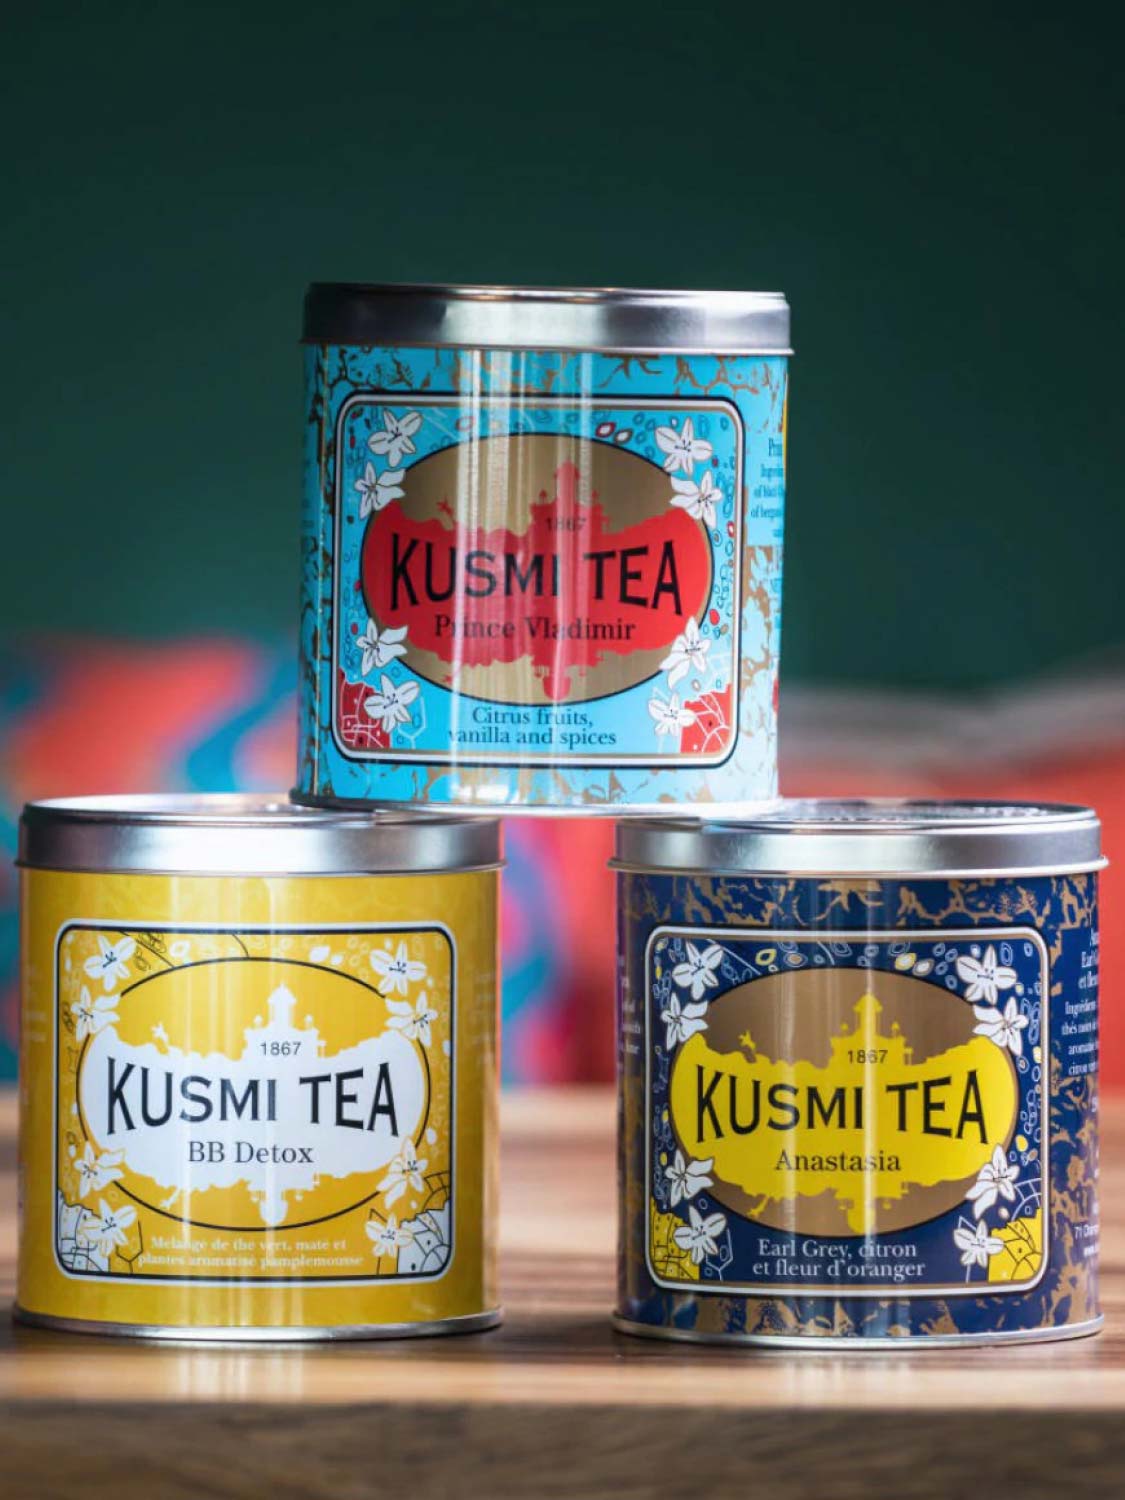 Kusmi tea company unveils first-ever 'beauty beverage' that claims to help  you look younger AND lose weight?